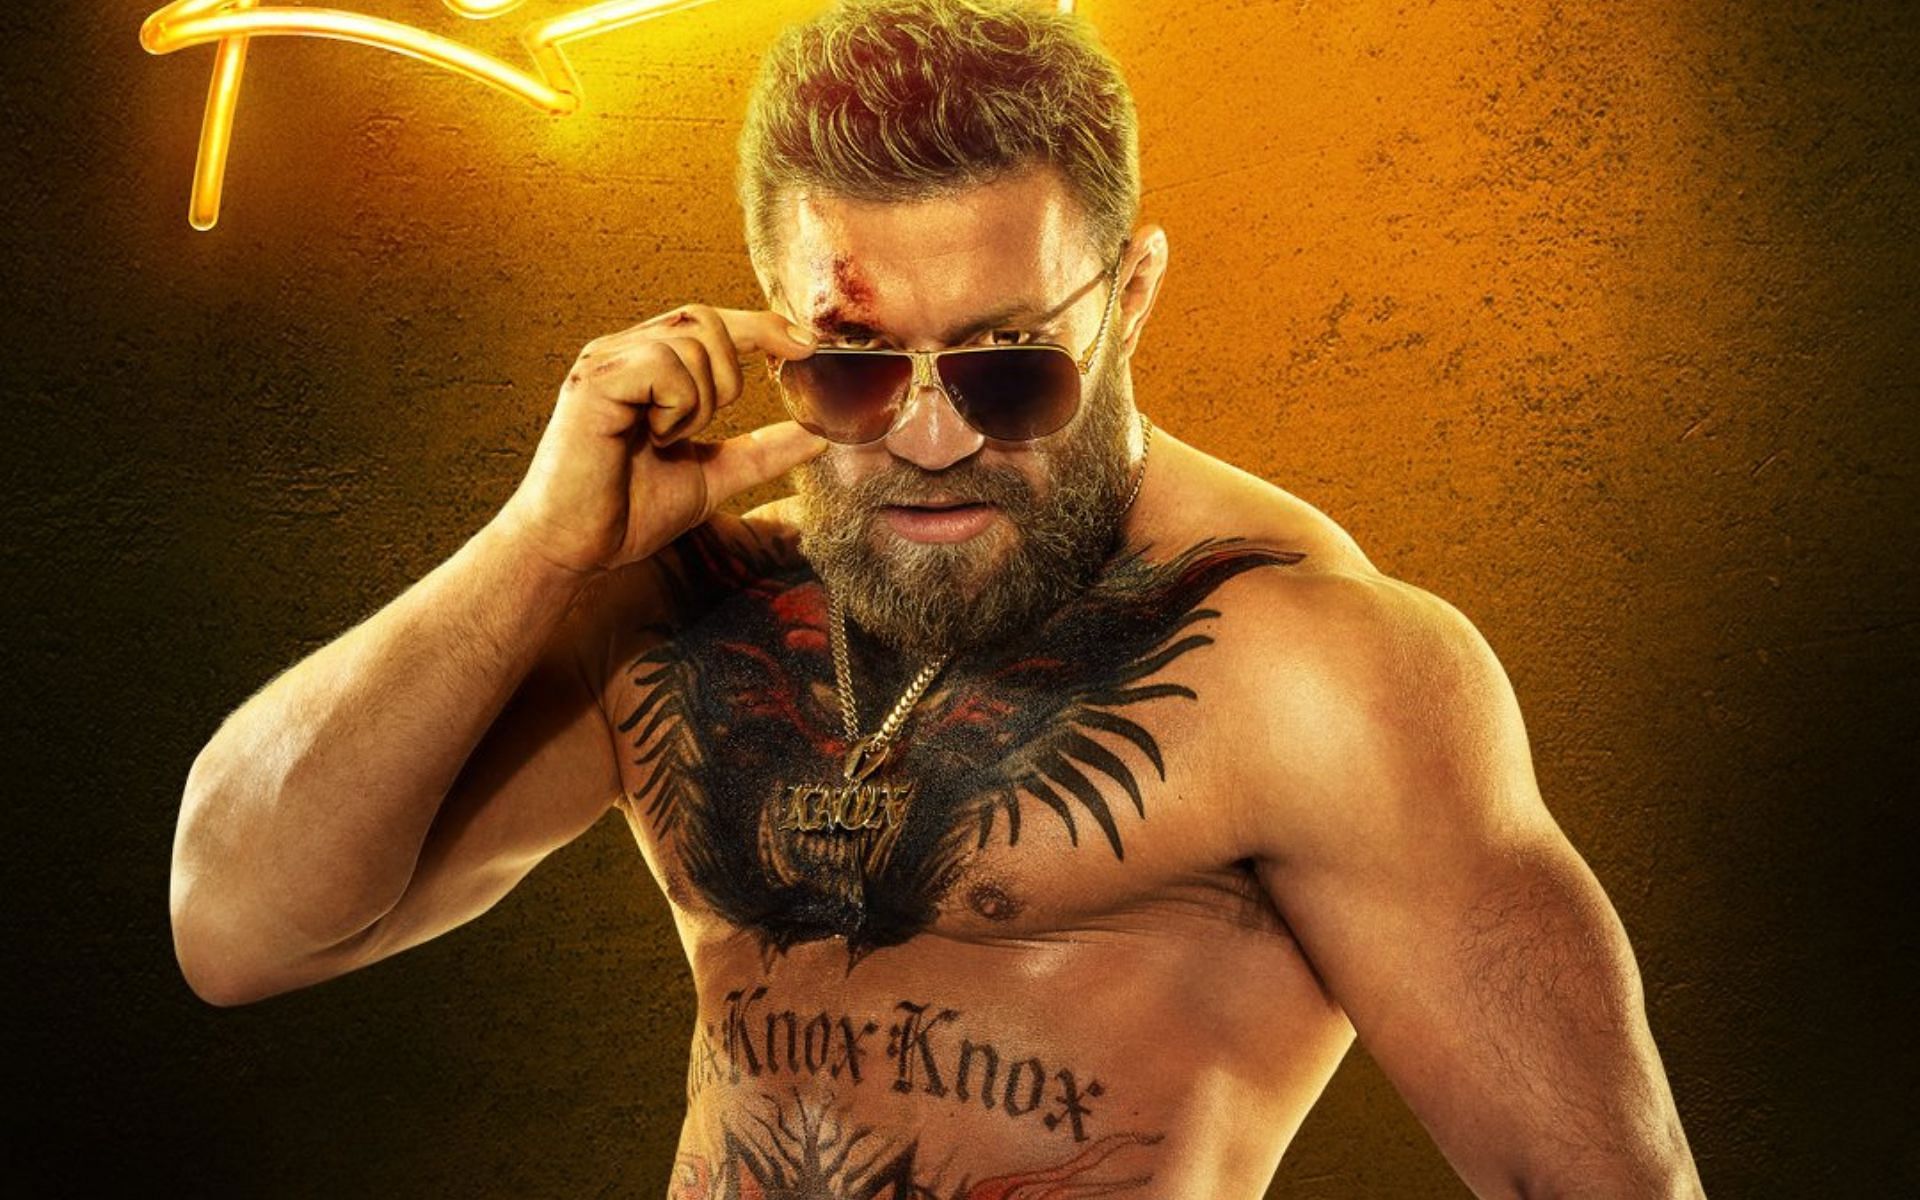 Conor McGregor in a poster for Road House (2024) (Image Courtesy - @TheNotoriousMMA on X/Twitter)